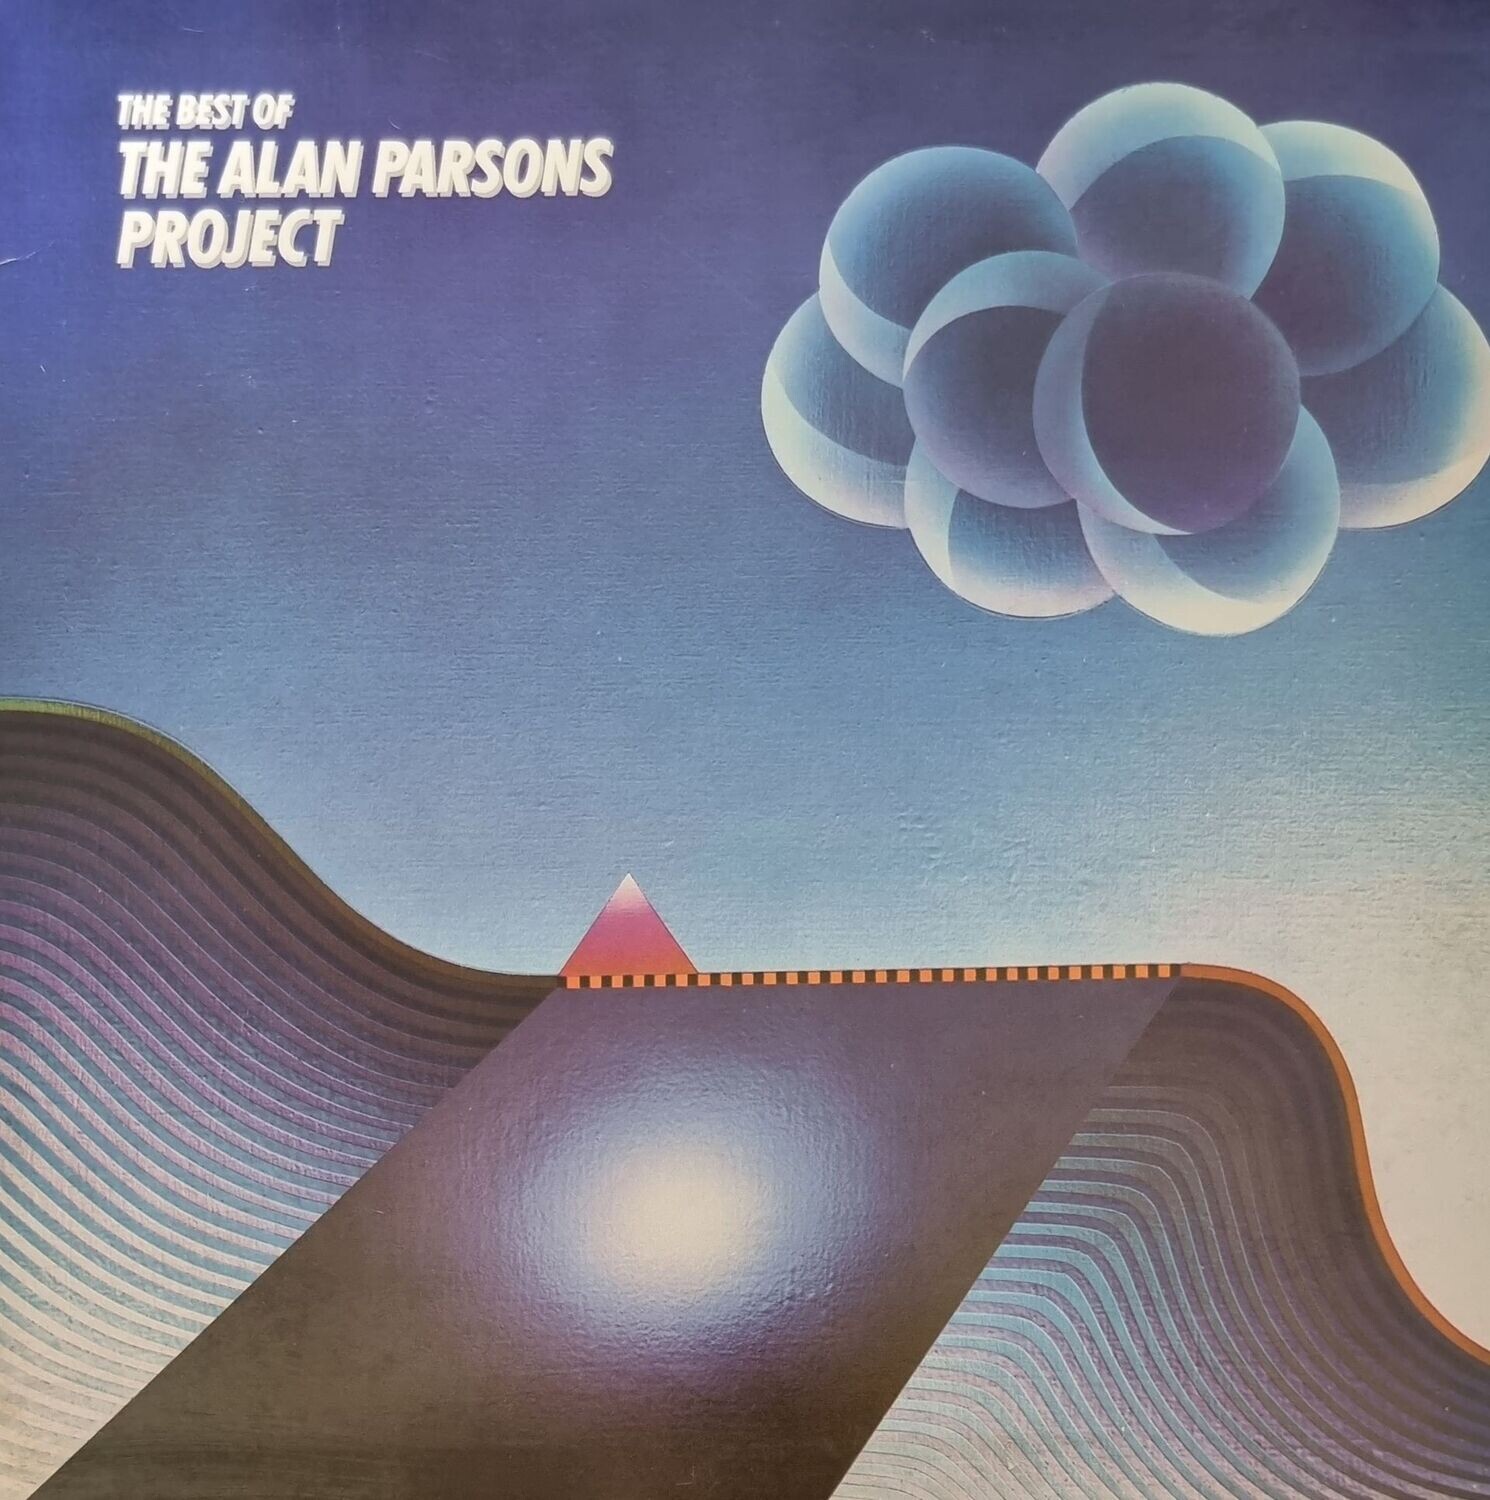 The Alan Parsons Project – The Best Of The Alan Parsons Project (1983) Gatefold Sleeve